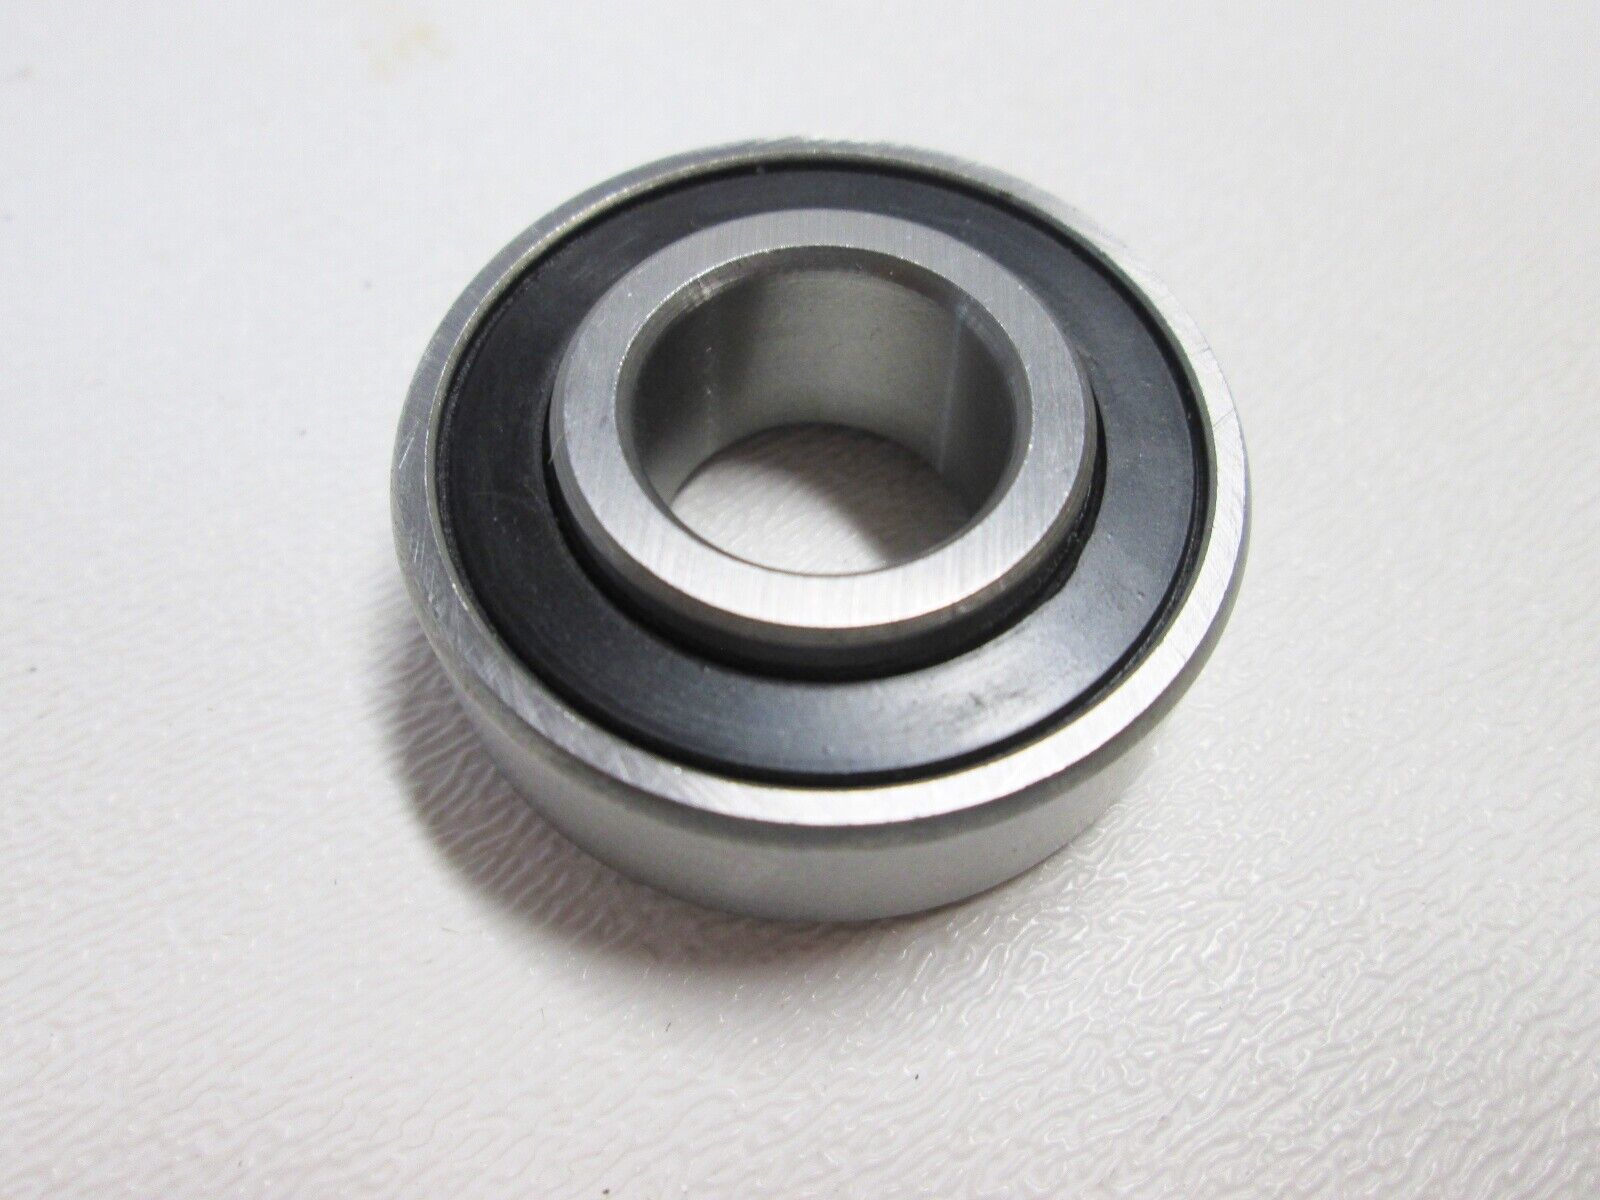 87505 PREMIUM 25x52x15.875/15 Single Row Metric Ball Bearing with Extended Inner Thumbnail